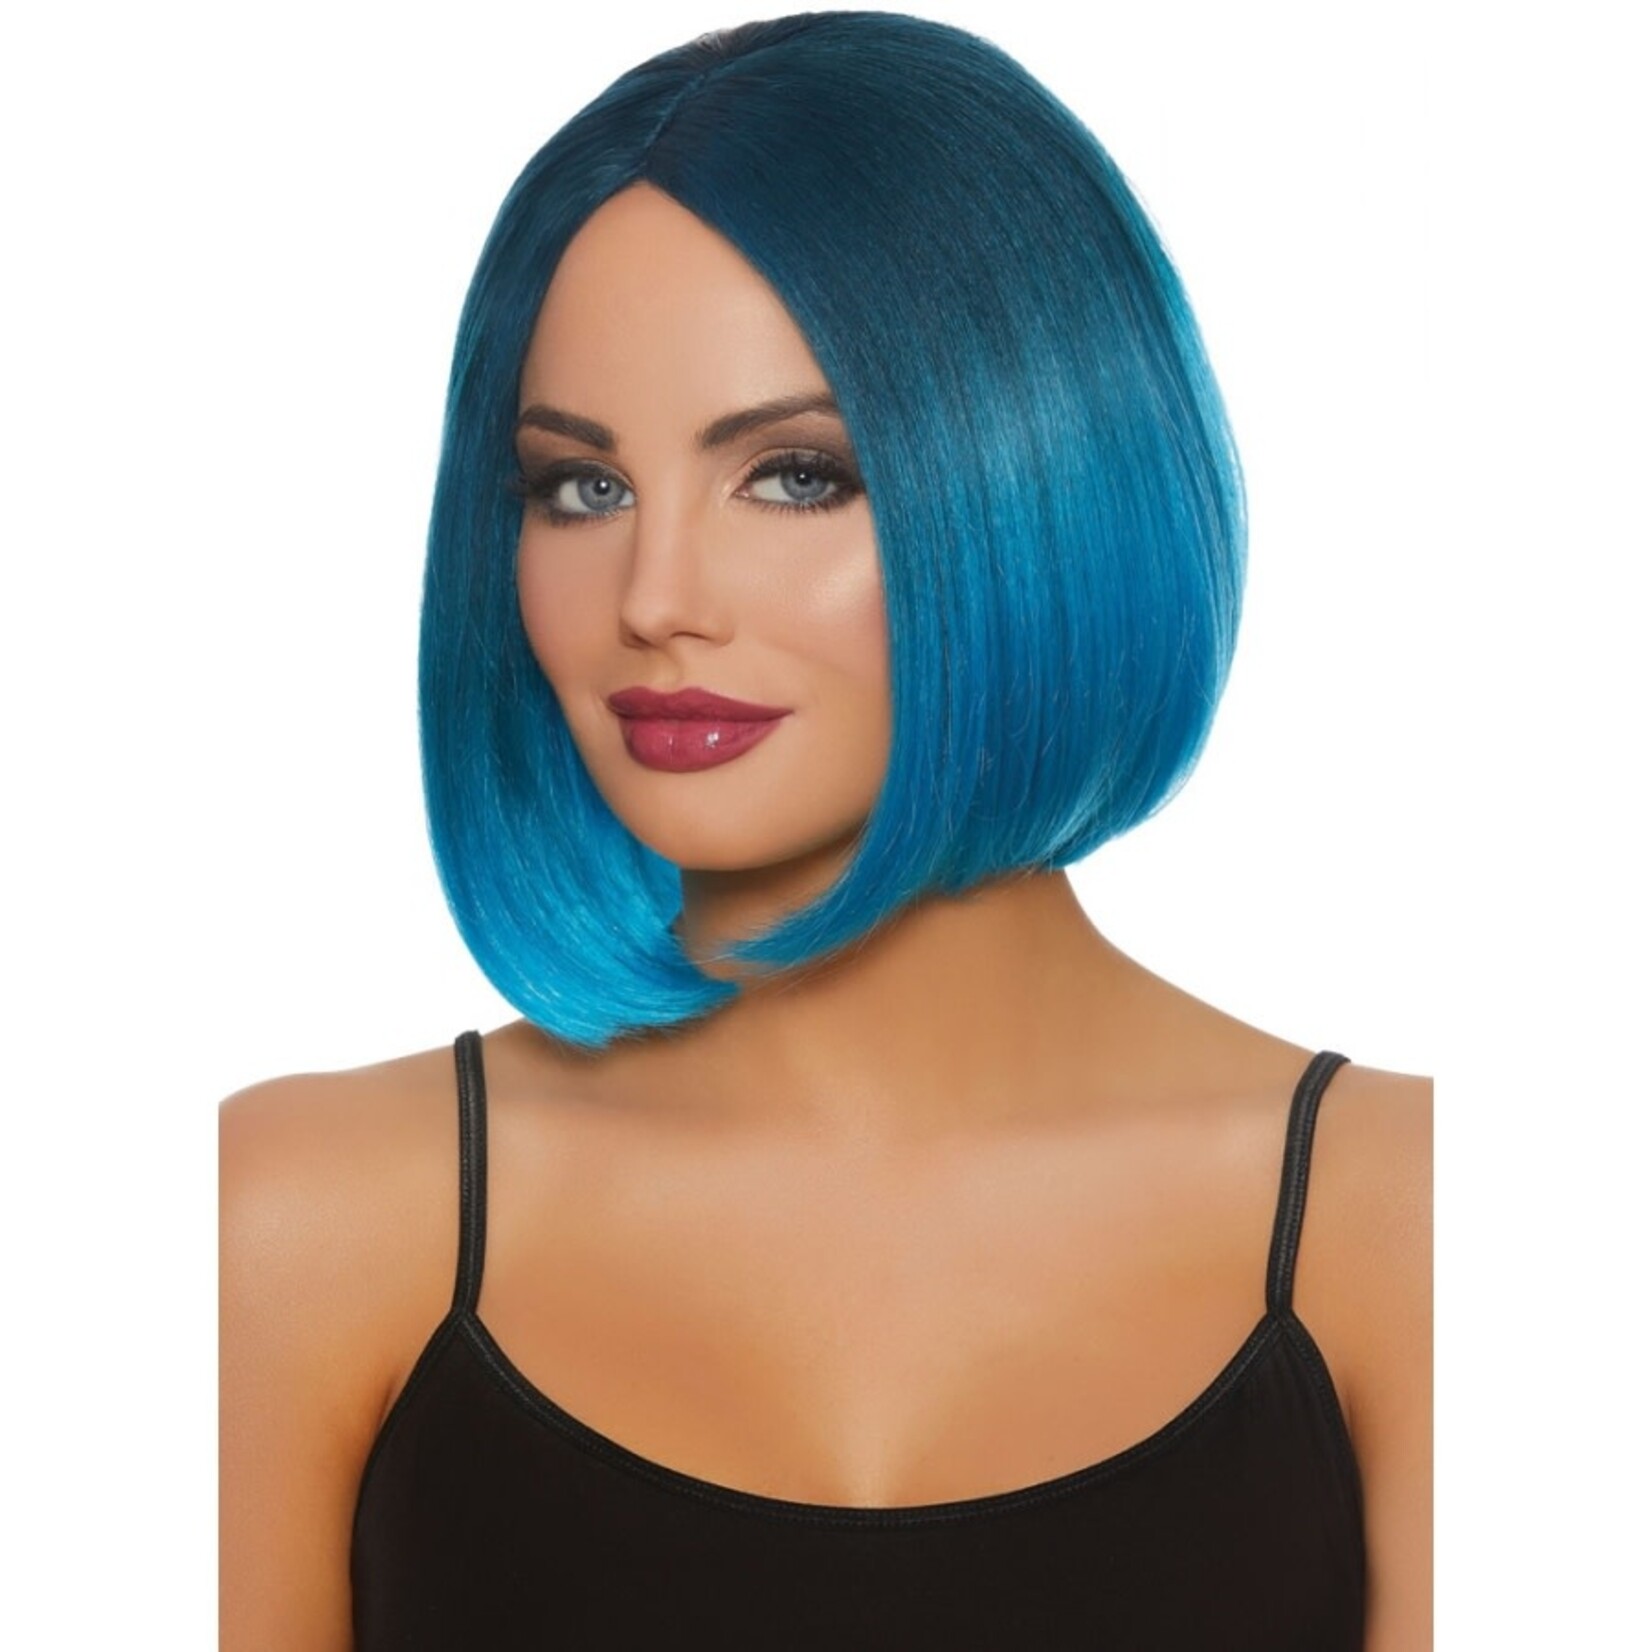 DREAMGIRL LINGERIE DREAMGIRL -  MID-LENGTH ADJUSTABLE OMBRE BOB WIG STEEL BLUE-BRIGHT BLUE O/S